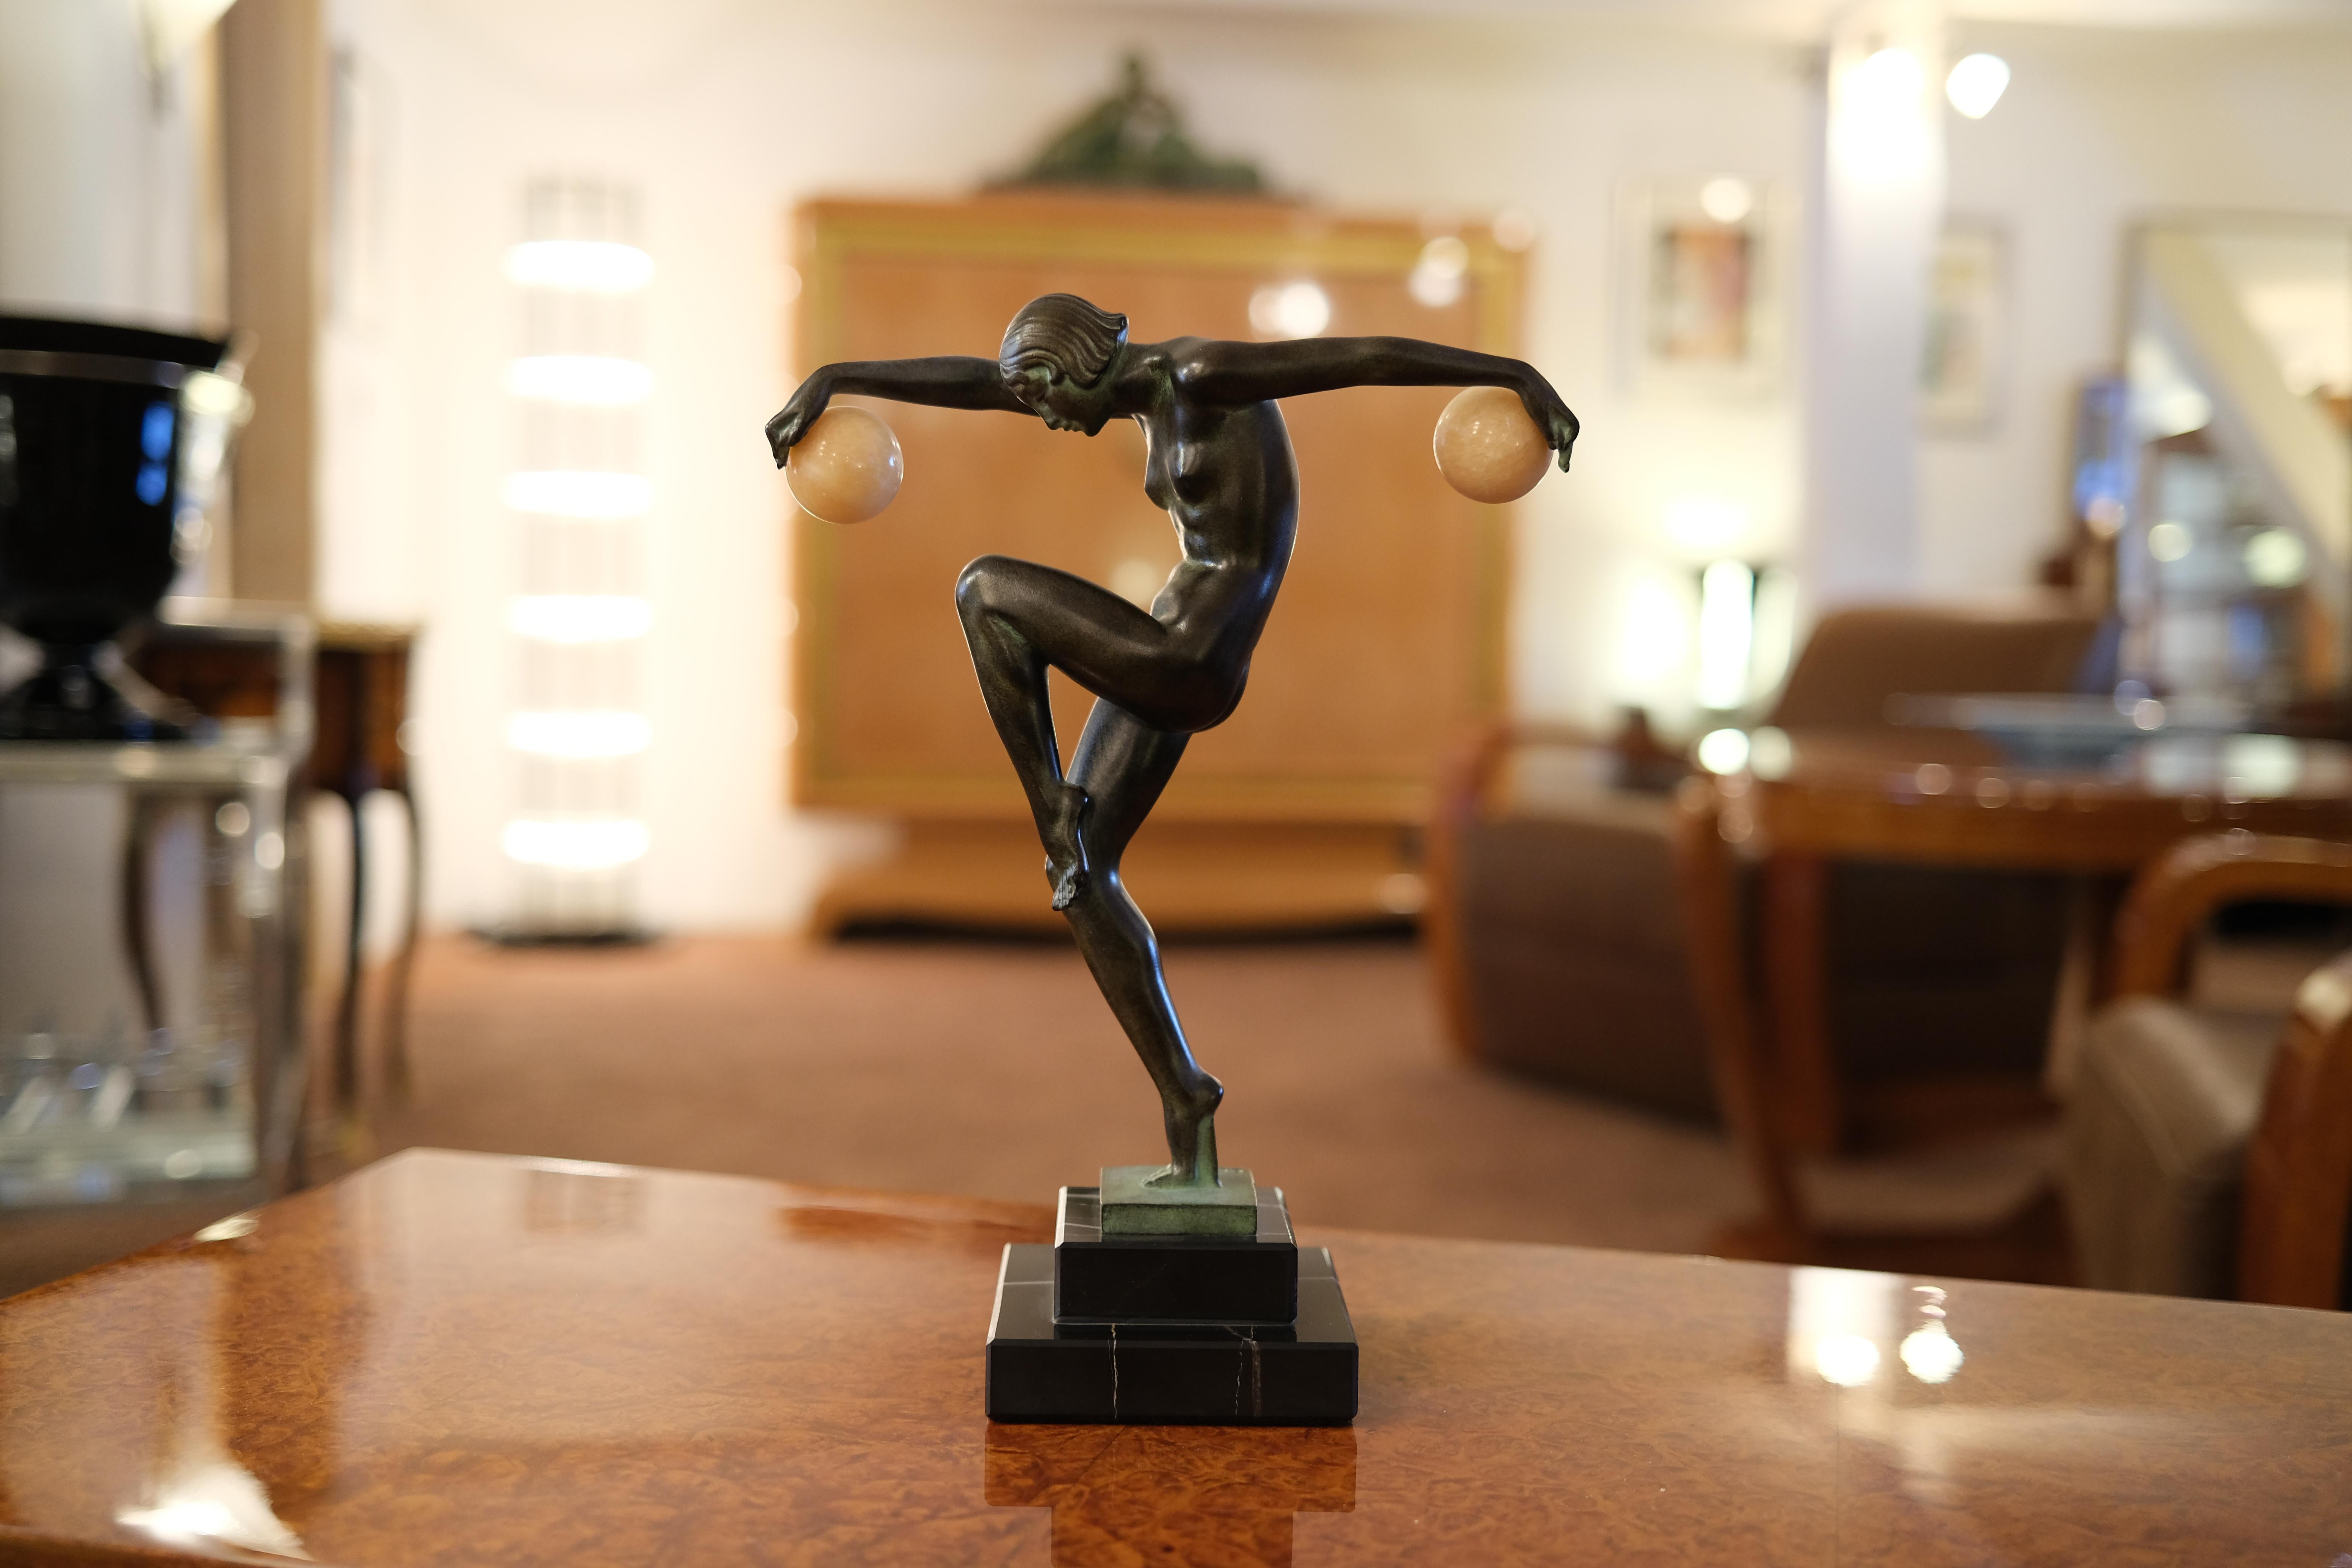 Sculpture of a dancing lady 
Danseuse Aux Boules (French: ball dancer) 

Designed in France during the roaring 1920s by “Maurice et Marcel Denis”, 
signed 
Original from the Max Le Verrier foundry, signed 

Art Deco style, France

Material: